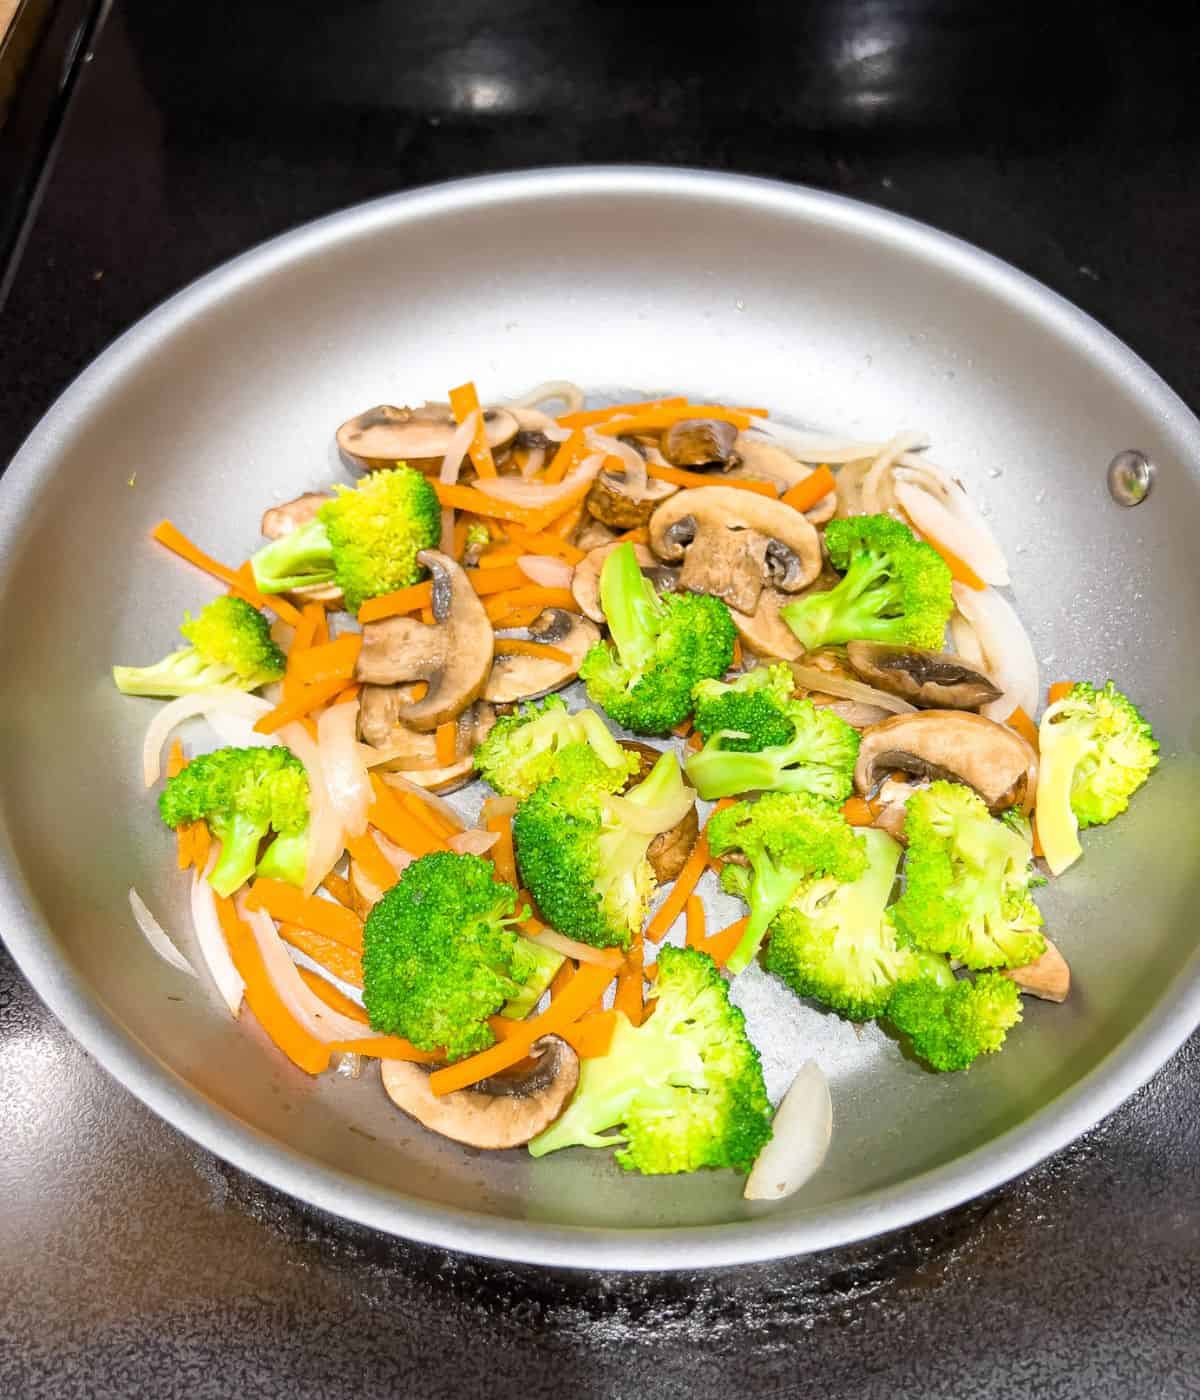 Stir-frying carrots, broccoli, and mushrooms in a skillet.